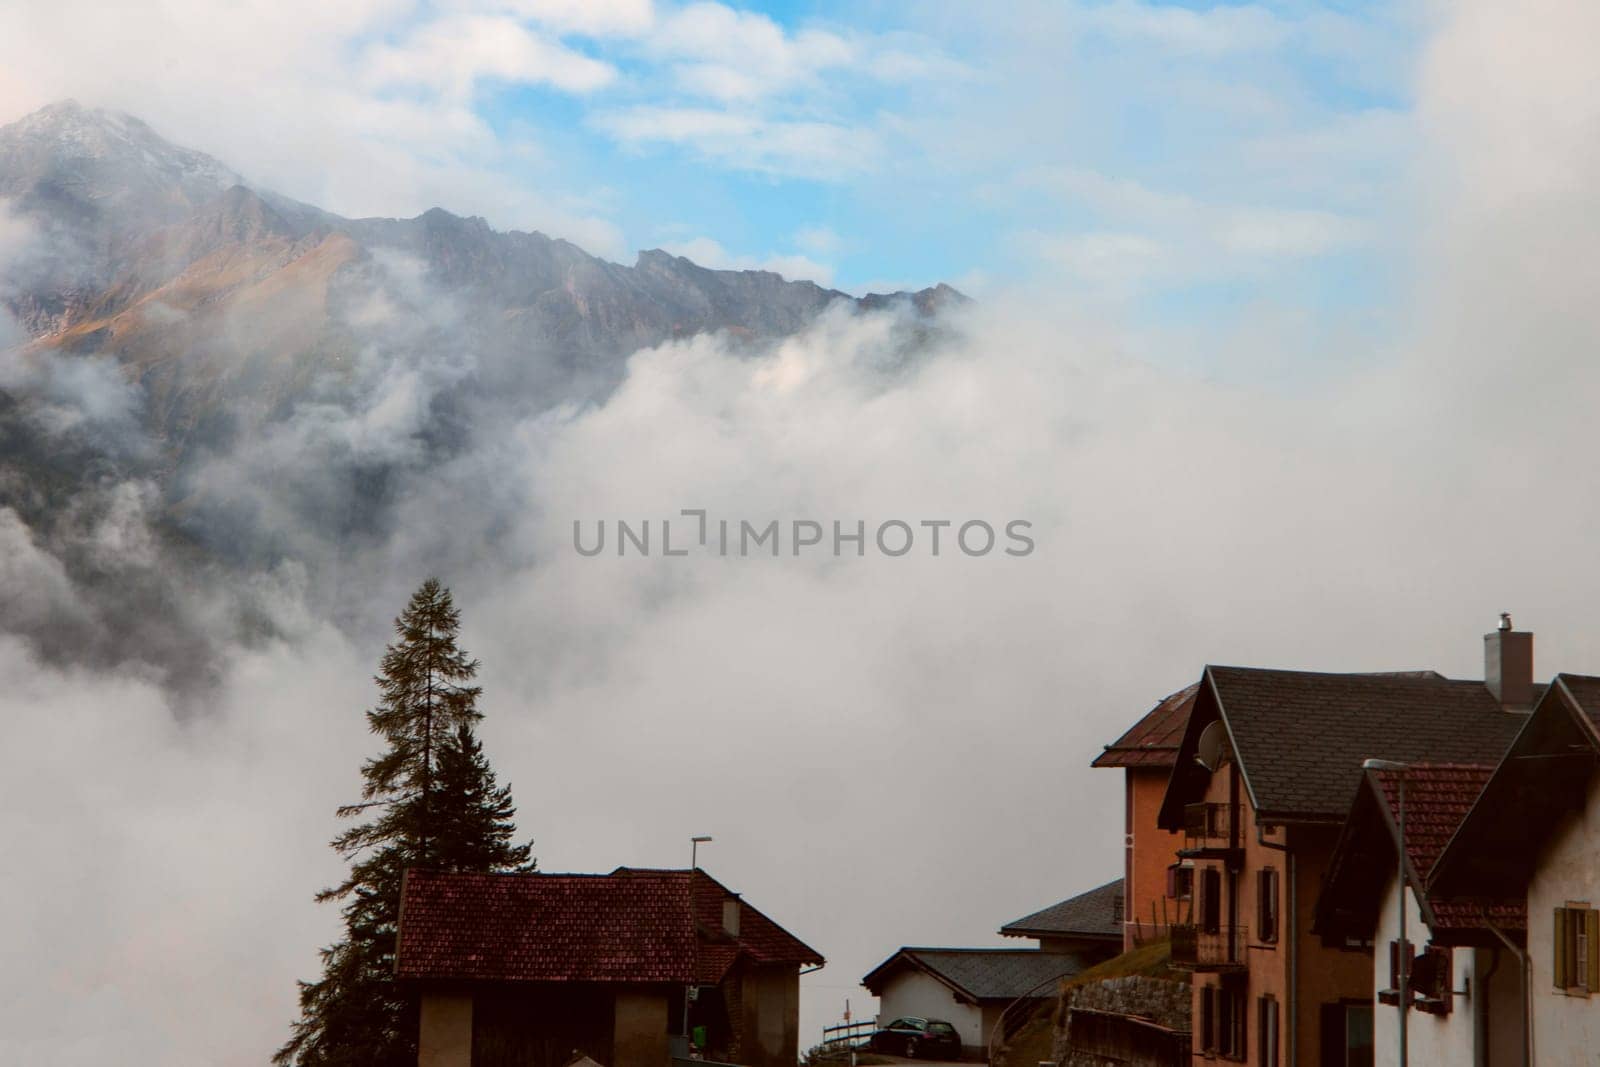 Clouds and Peaks: A Village Morning at the Foot of Whispering Alpine Giants by NadyaBeson